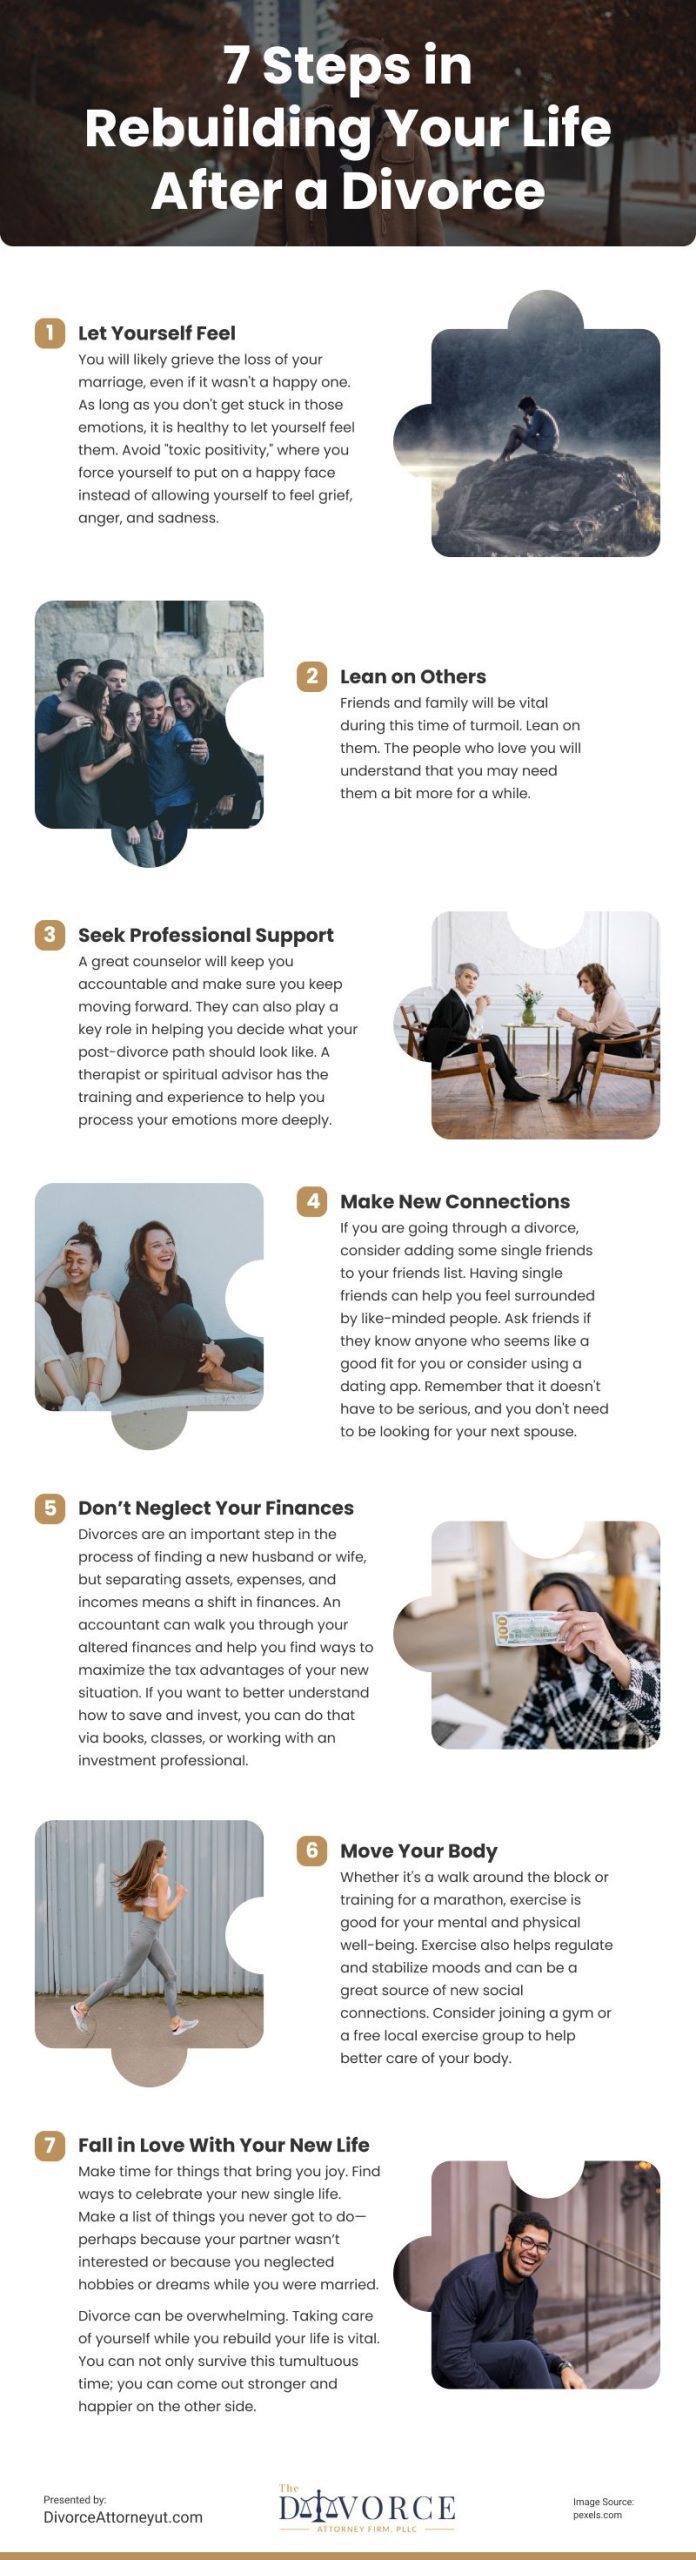 7 Steps in Rebuilding Your Life After a Divorce Infographic